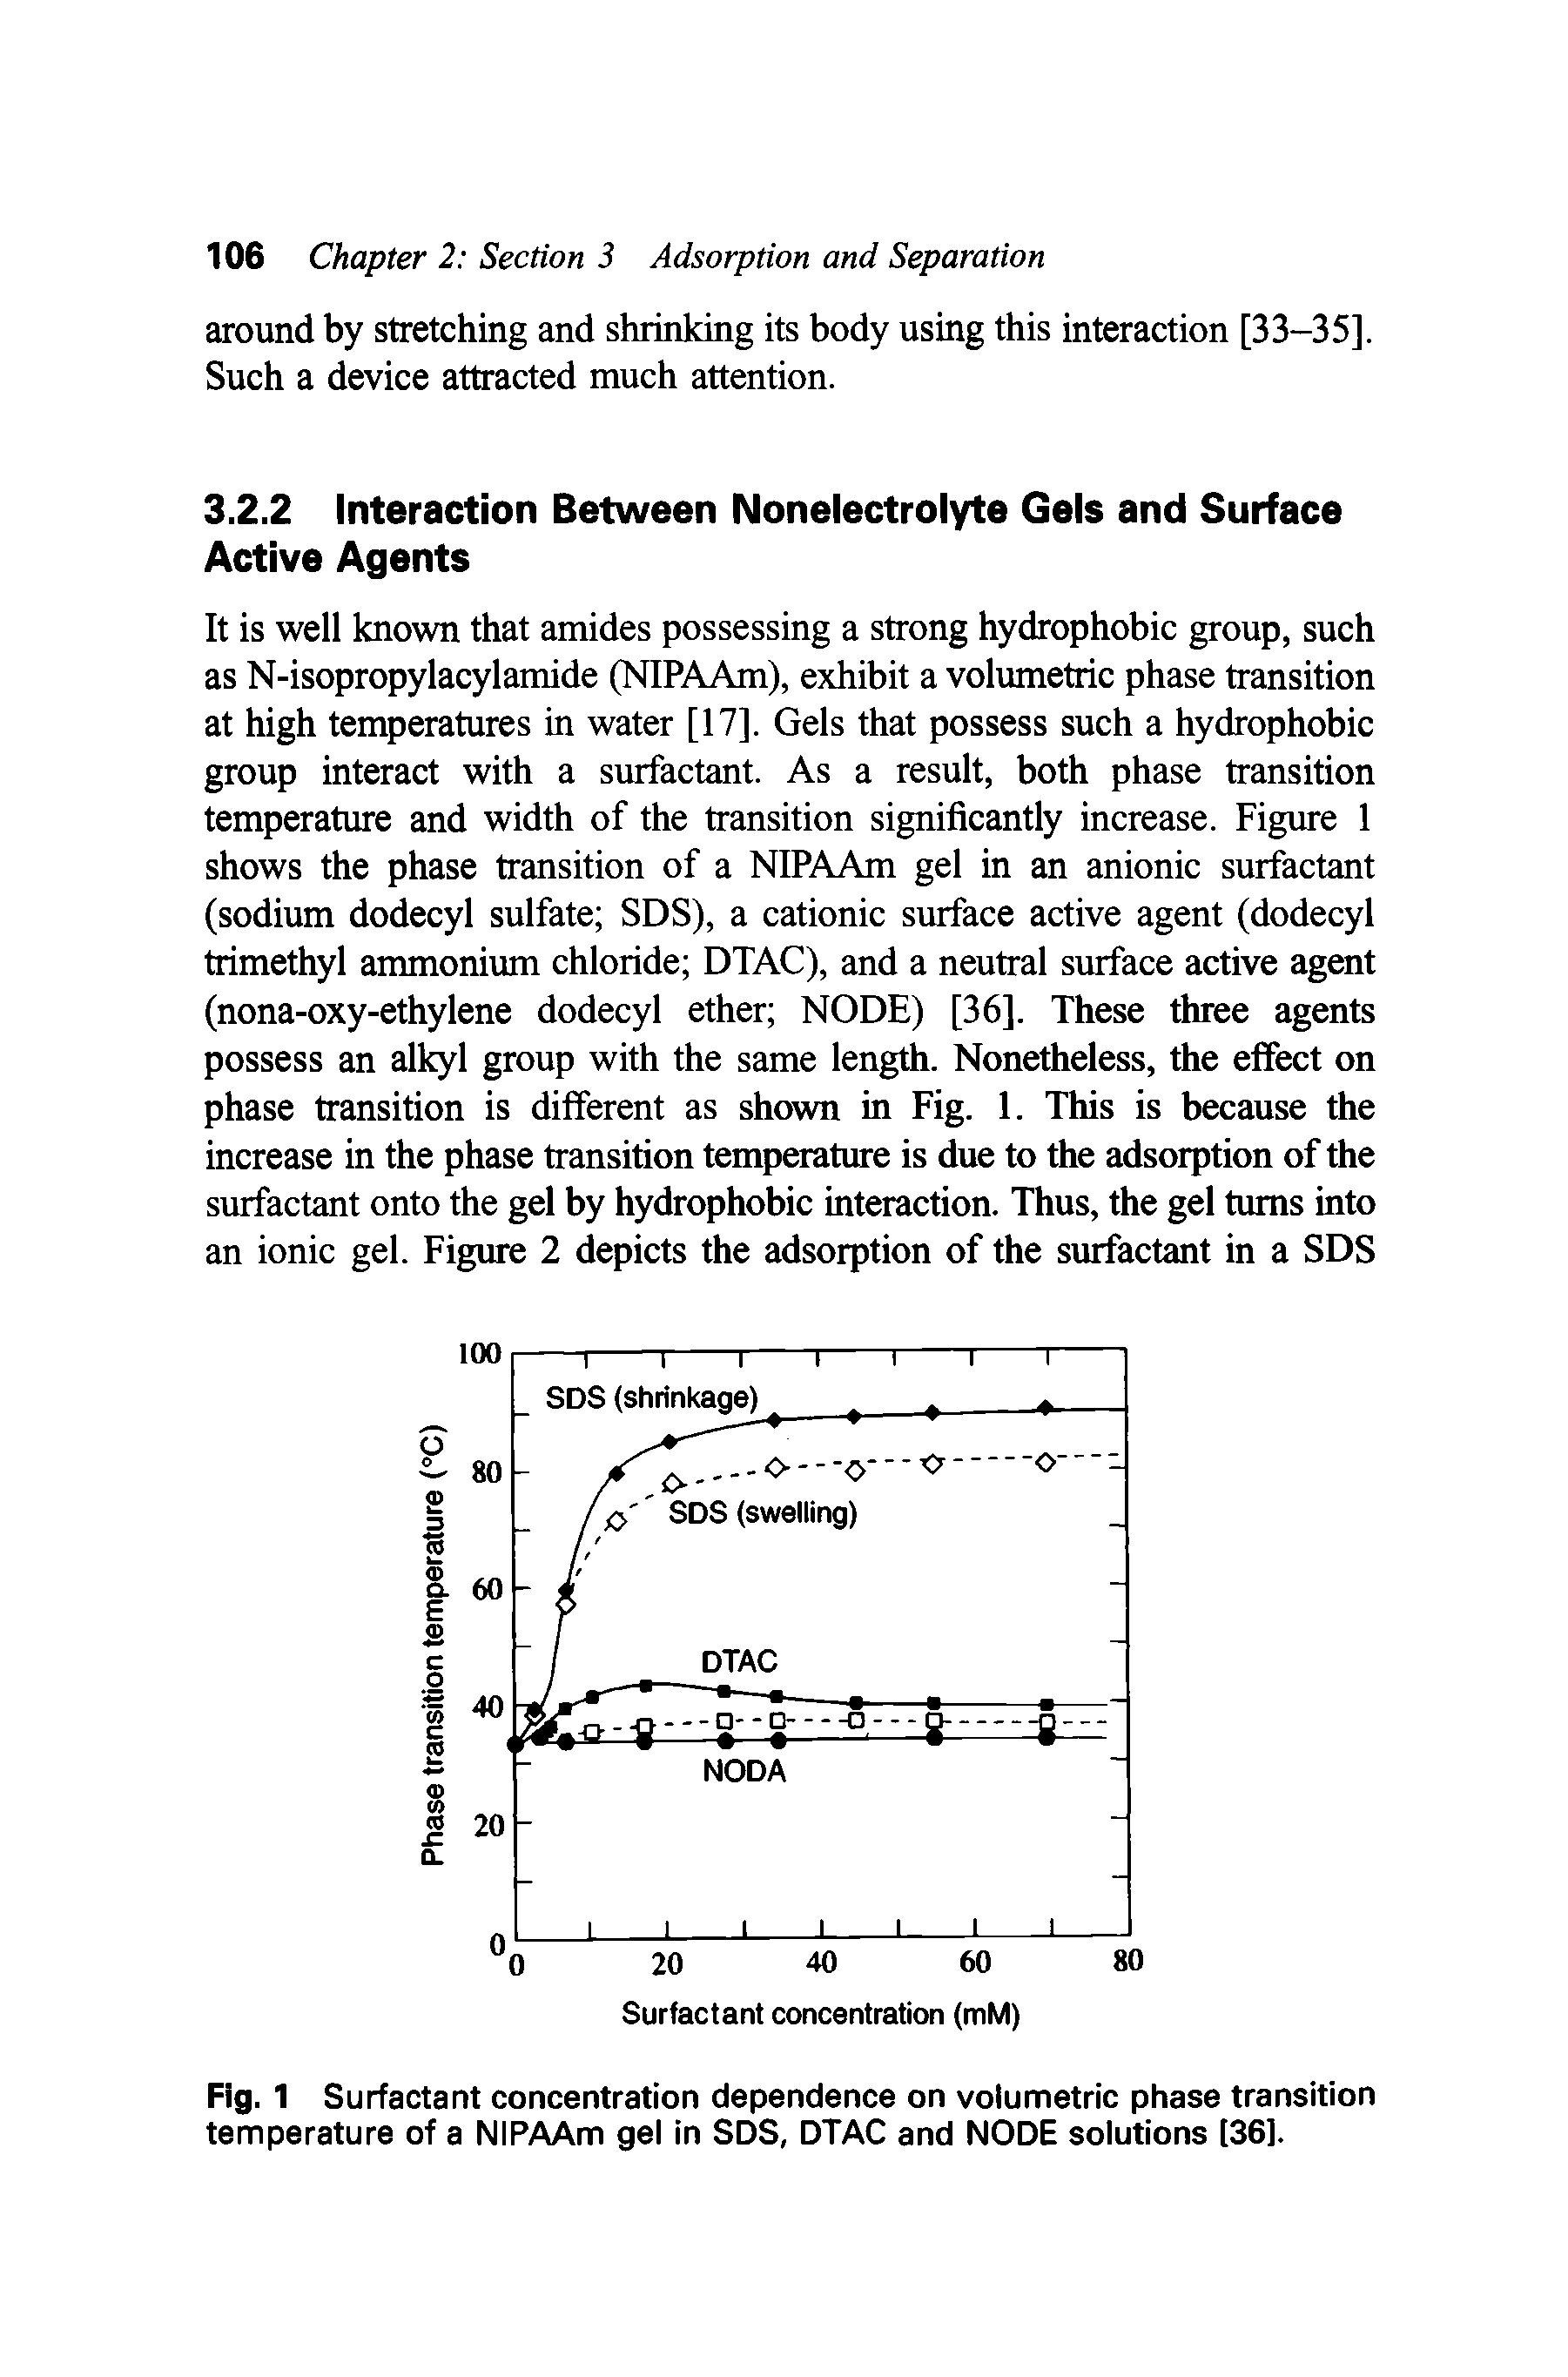 Fig.1 Surfactant concentration dependence on volumetric phase transition temperature of a NIPAAm gel in SDS. DTAC and NODE solutions [36].